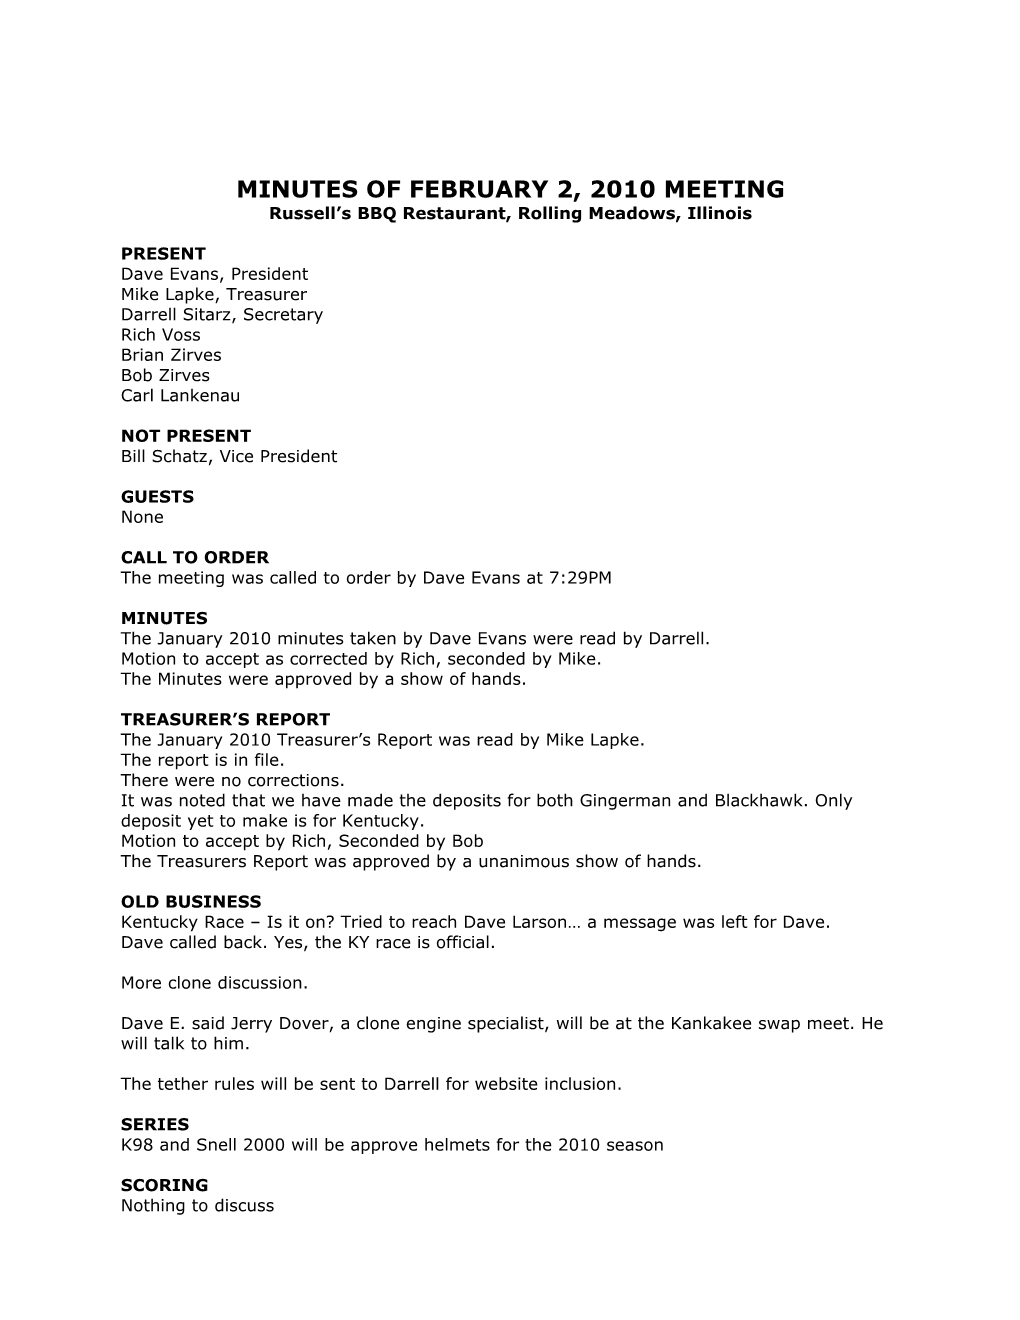 Minutes of February 2, 2010 Meeting